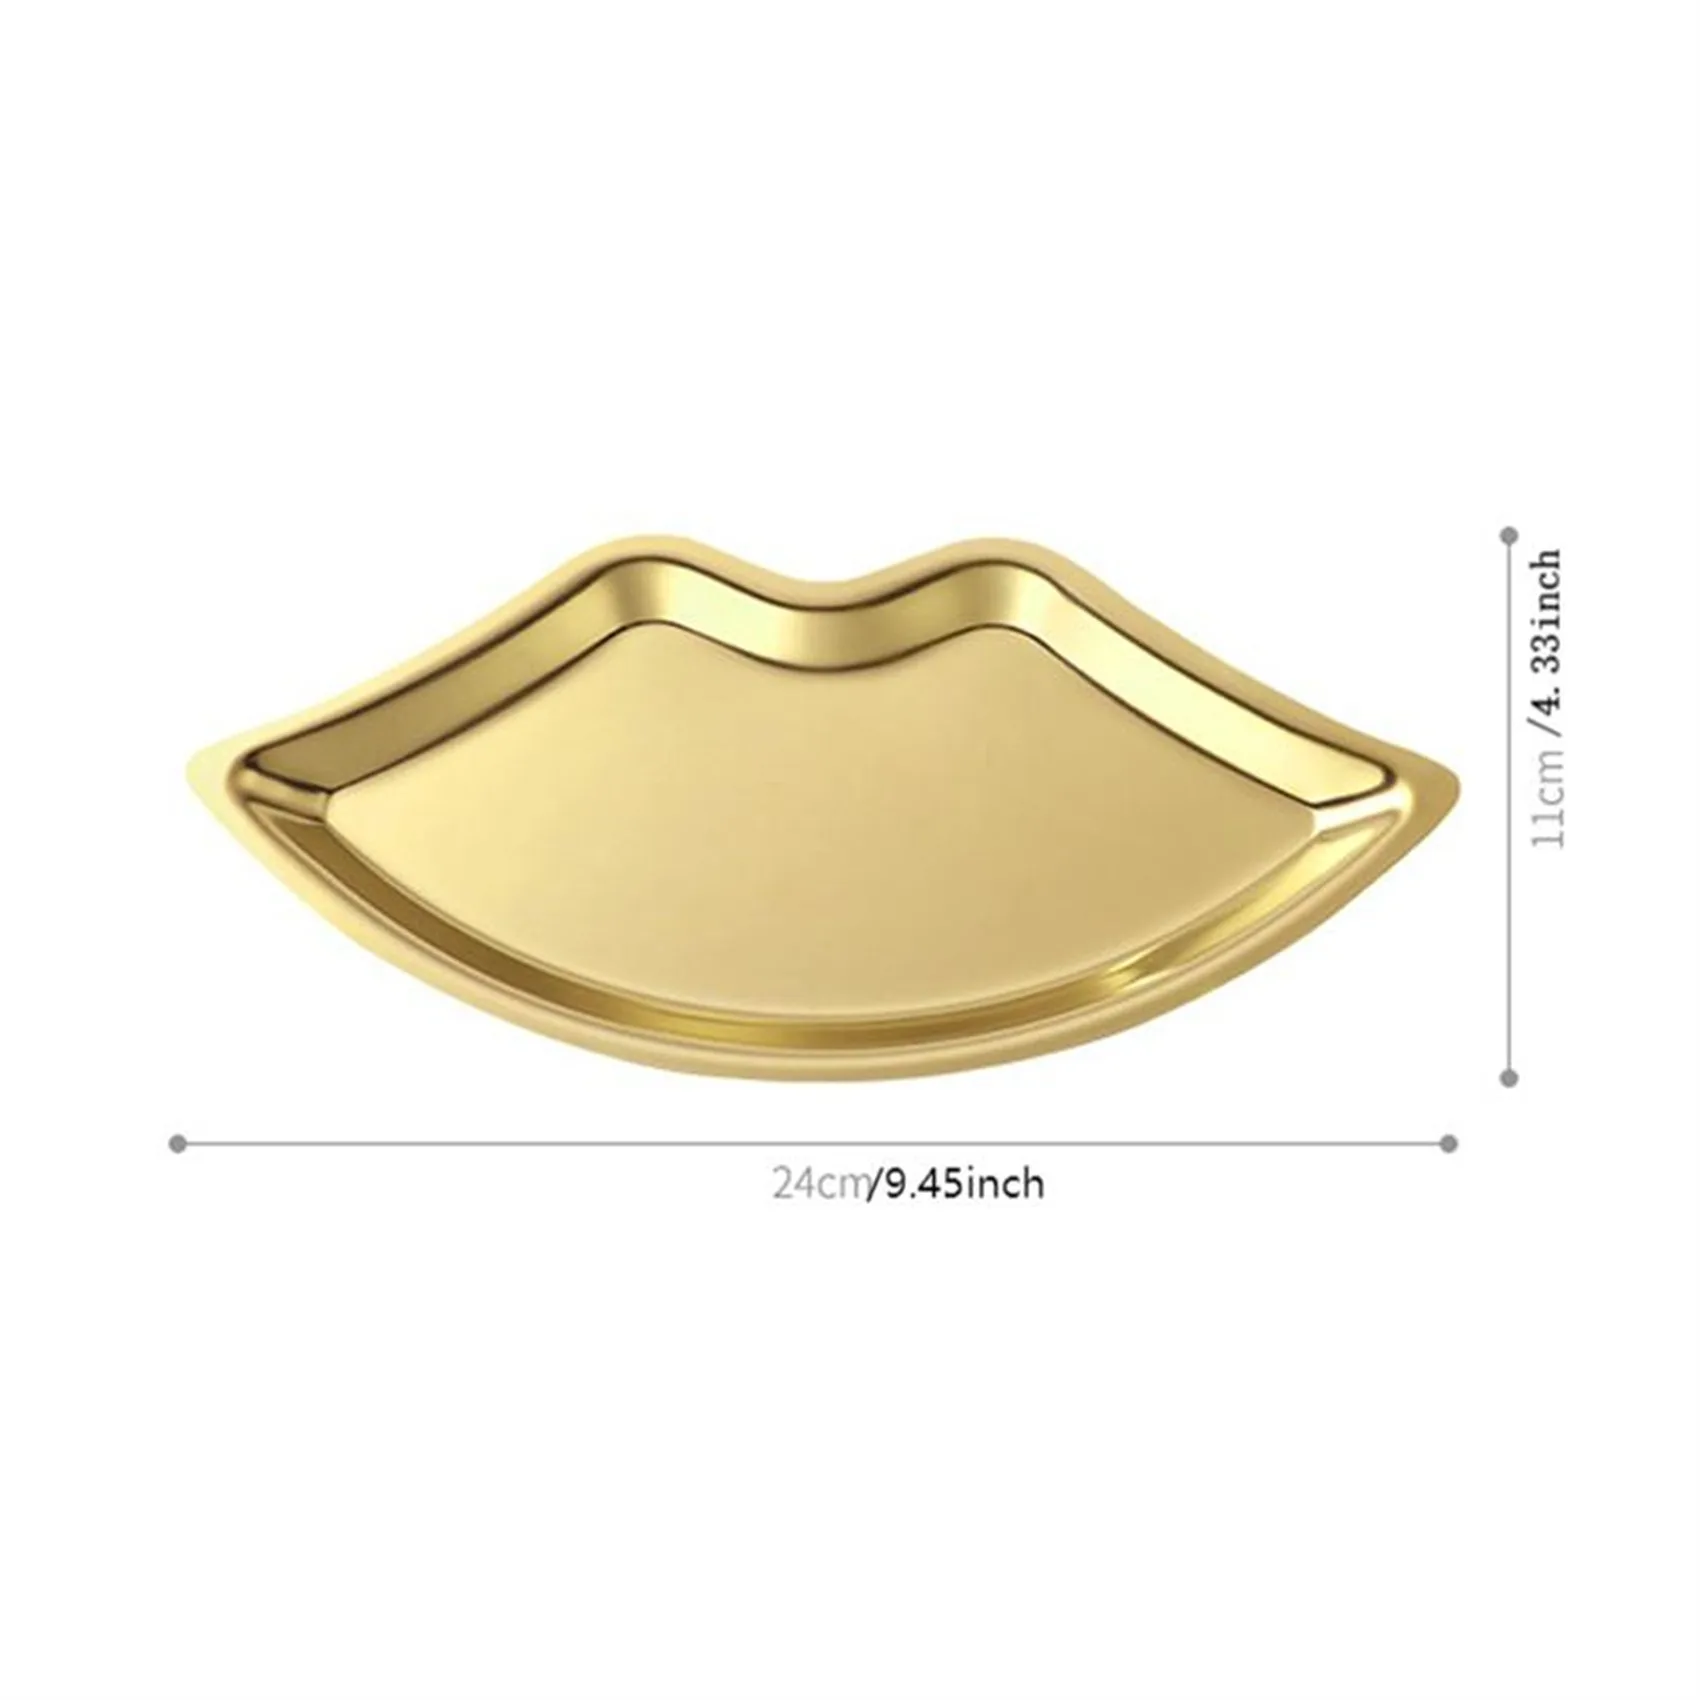 Korean Style Ins Style Stainless Steel Lip Shaped Jewelry Tray Home Cosmetics Metal Tray Female Jewelry Storage Tray Decorative